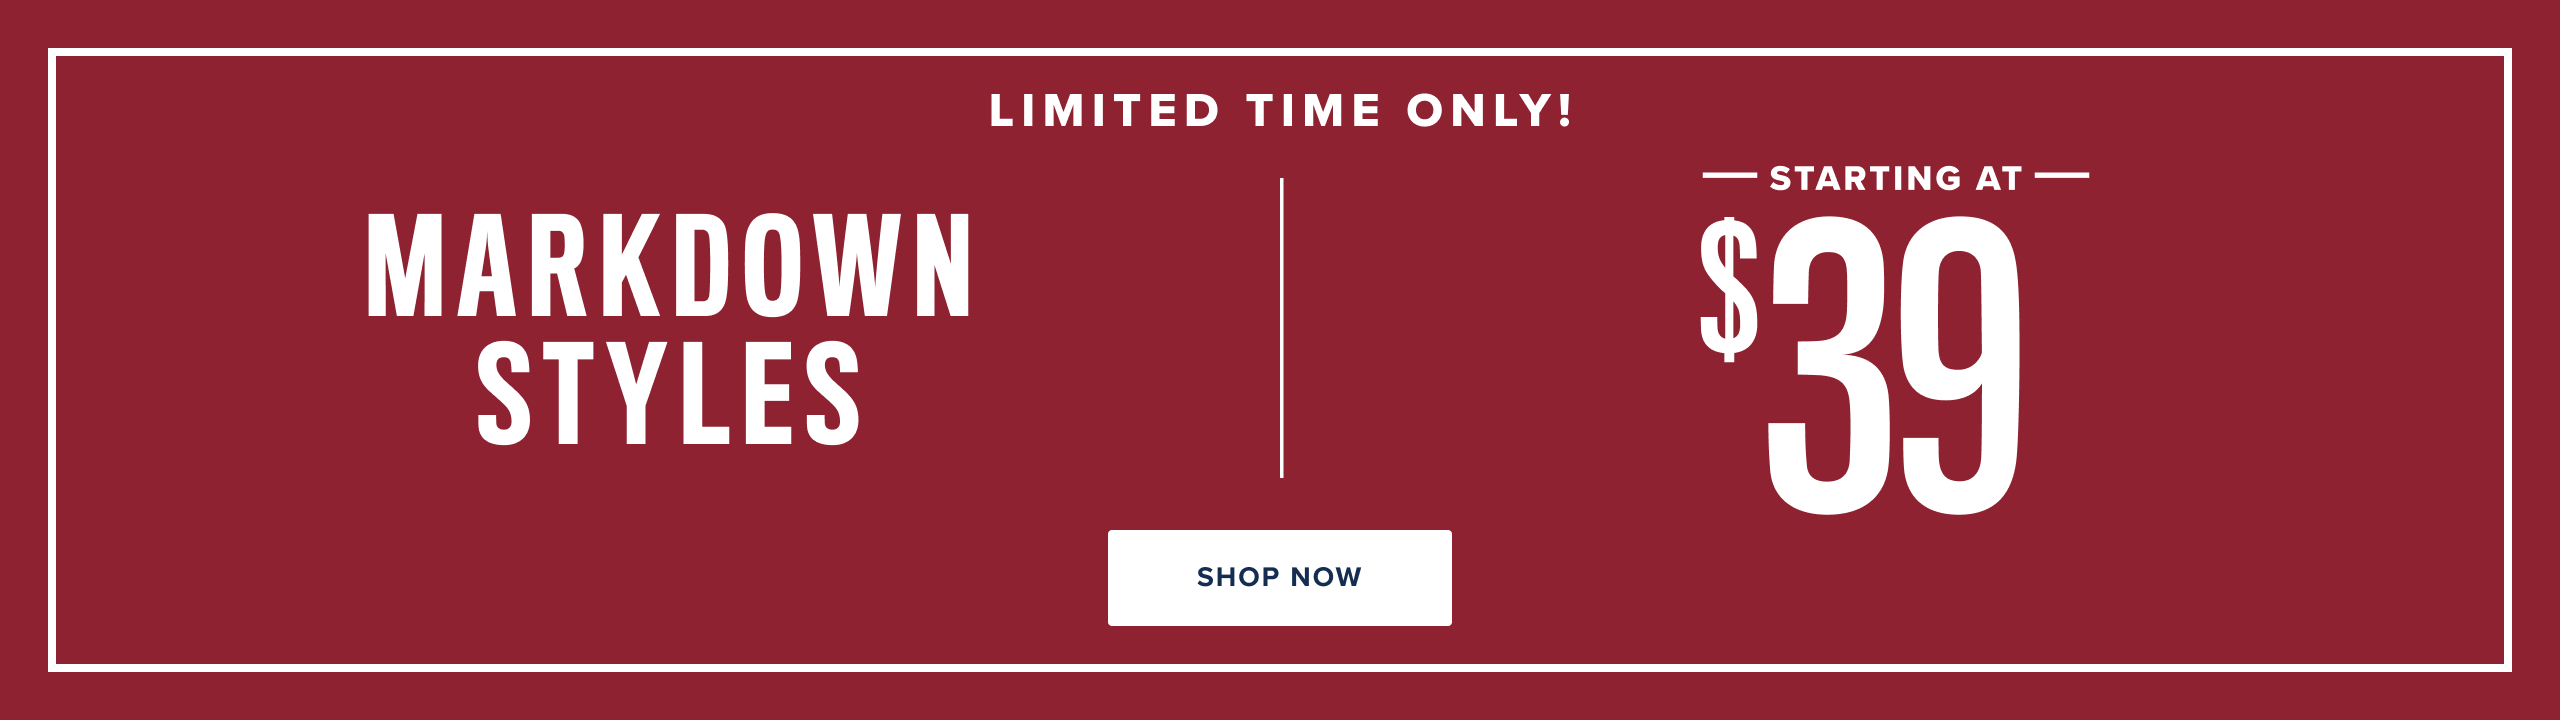 Limited time only! Markdown styles starting at $39.